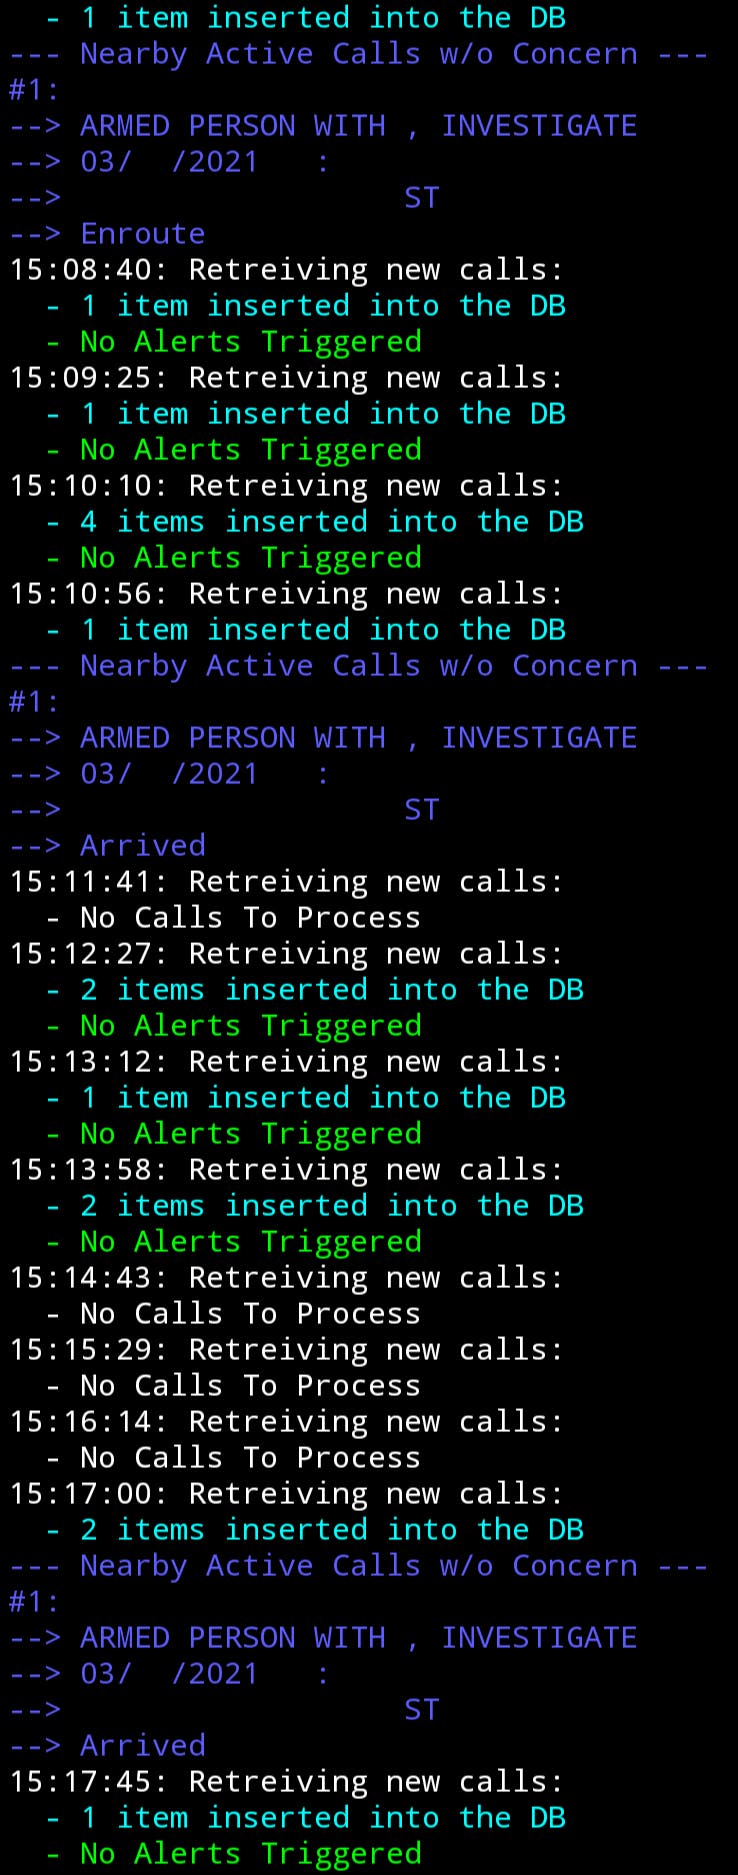 A preview of the output statements during an alert event